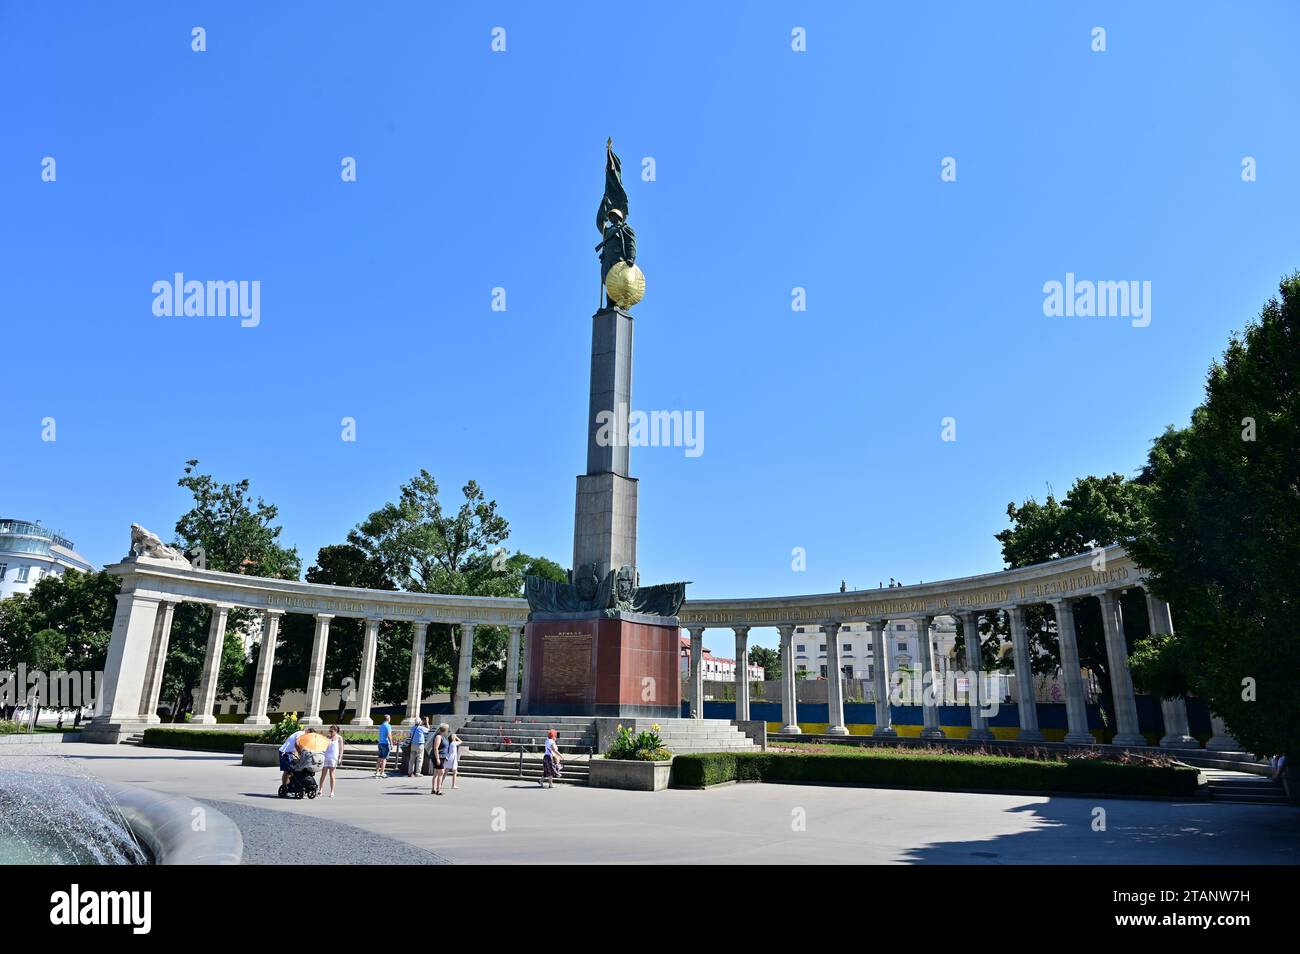 Heroes' Monument of the Red Army, so-called Russian Monument or monument in honor of the soldiers of the Soviet Army, Liberation Monument and Victory Stock Photo